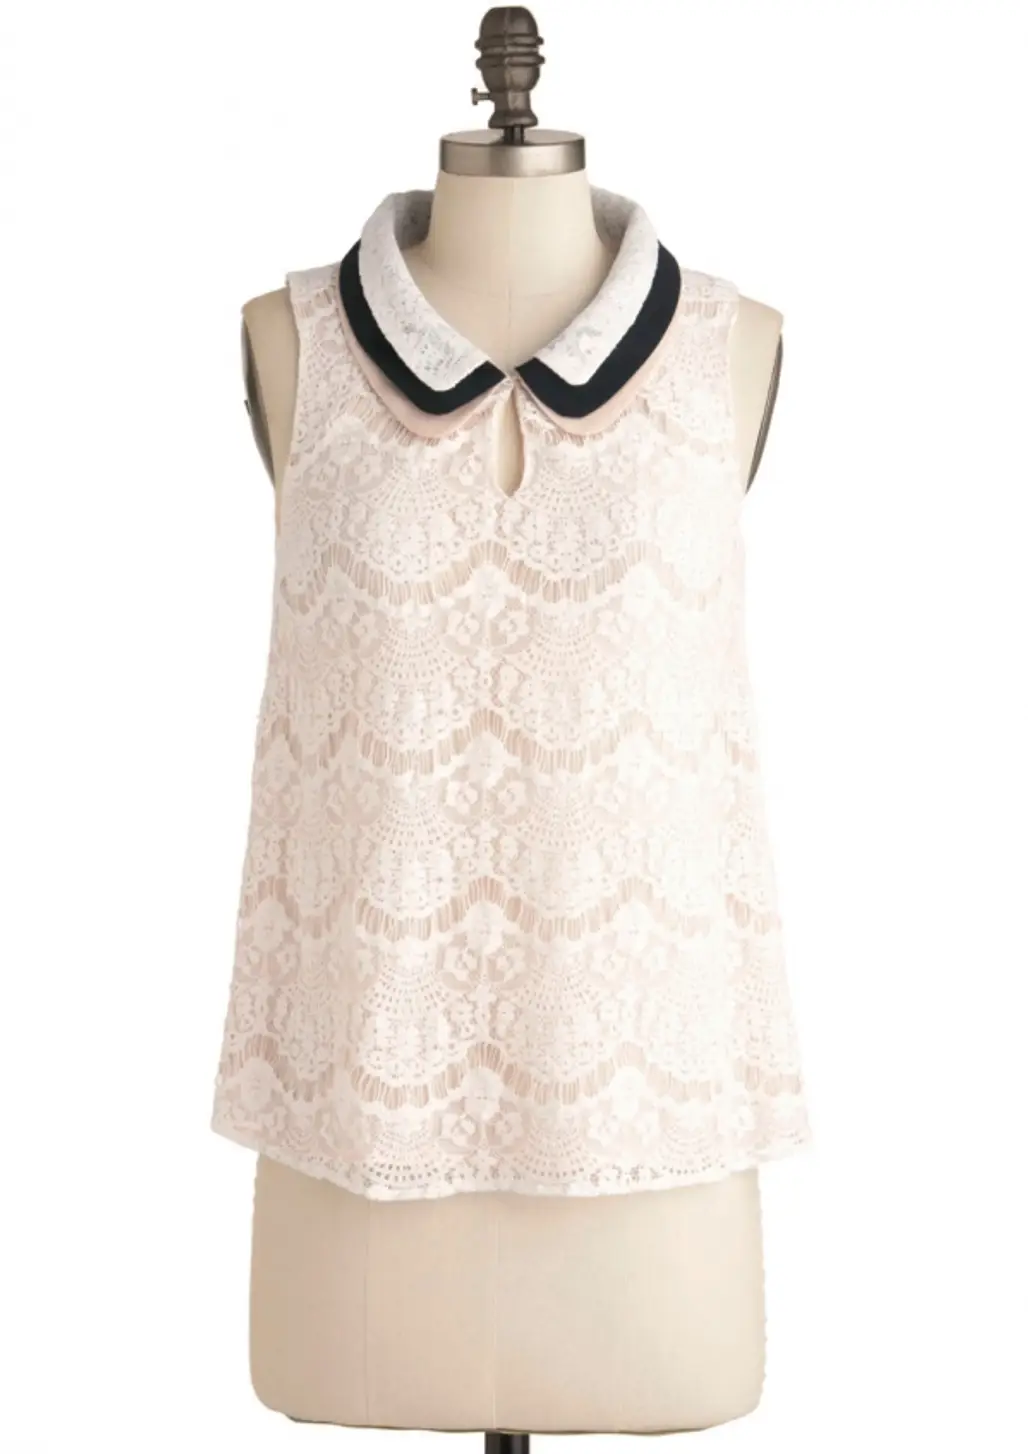 Modcloth – Lace Share Top